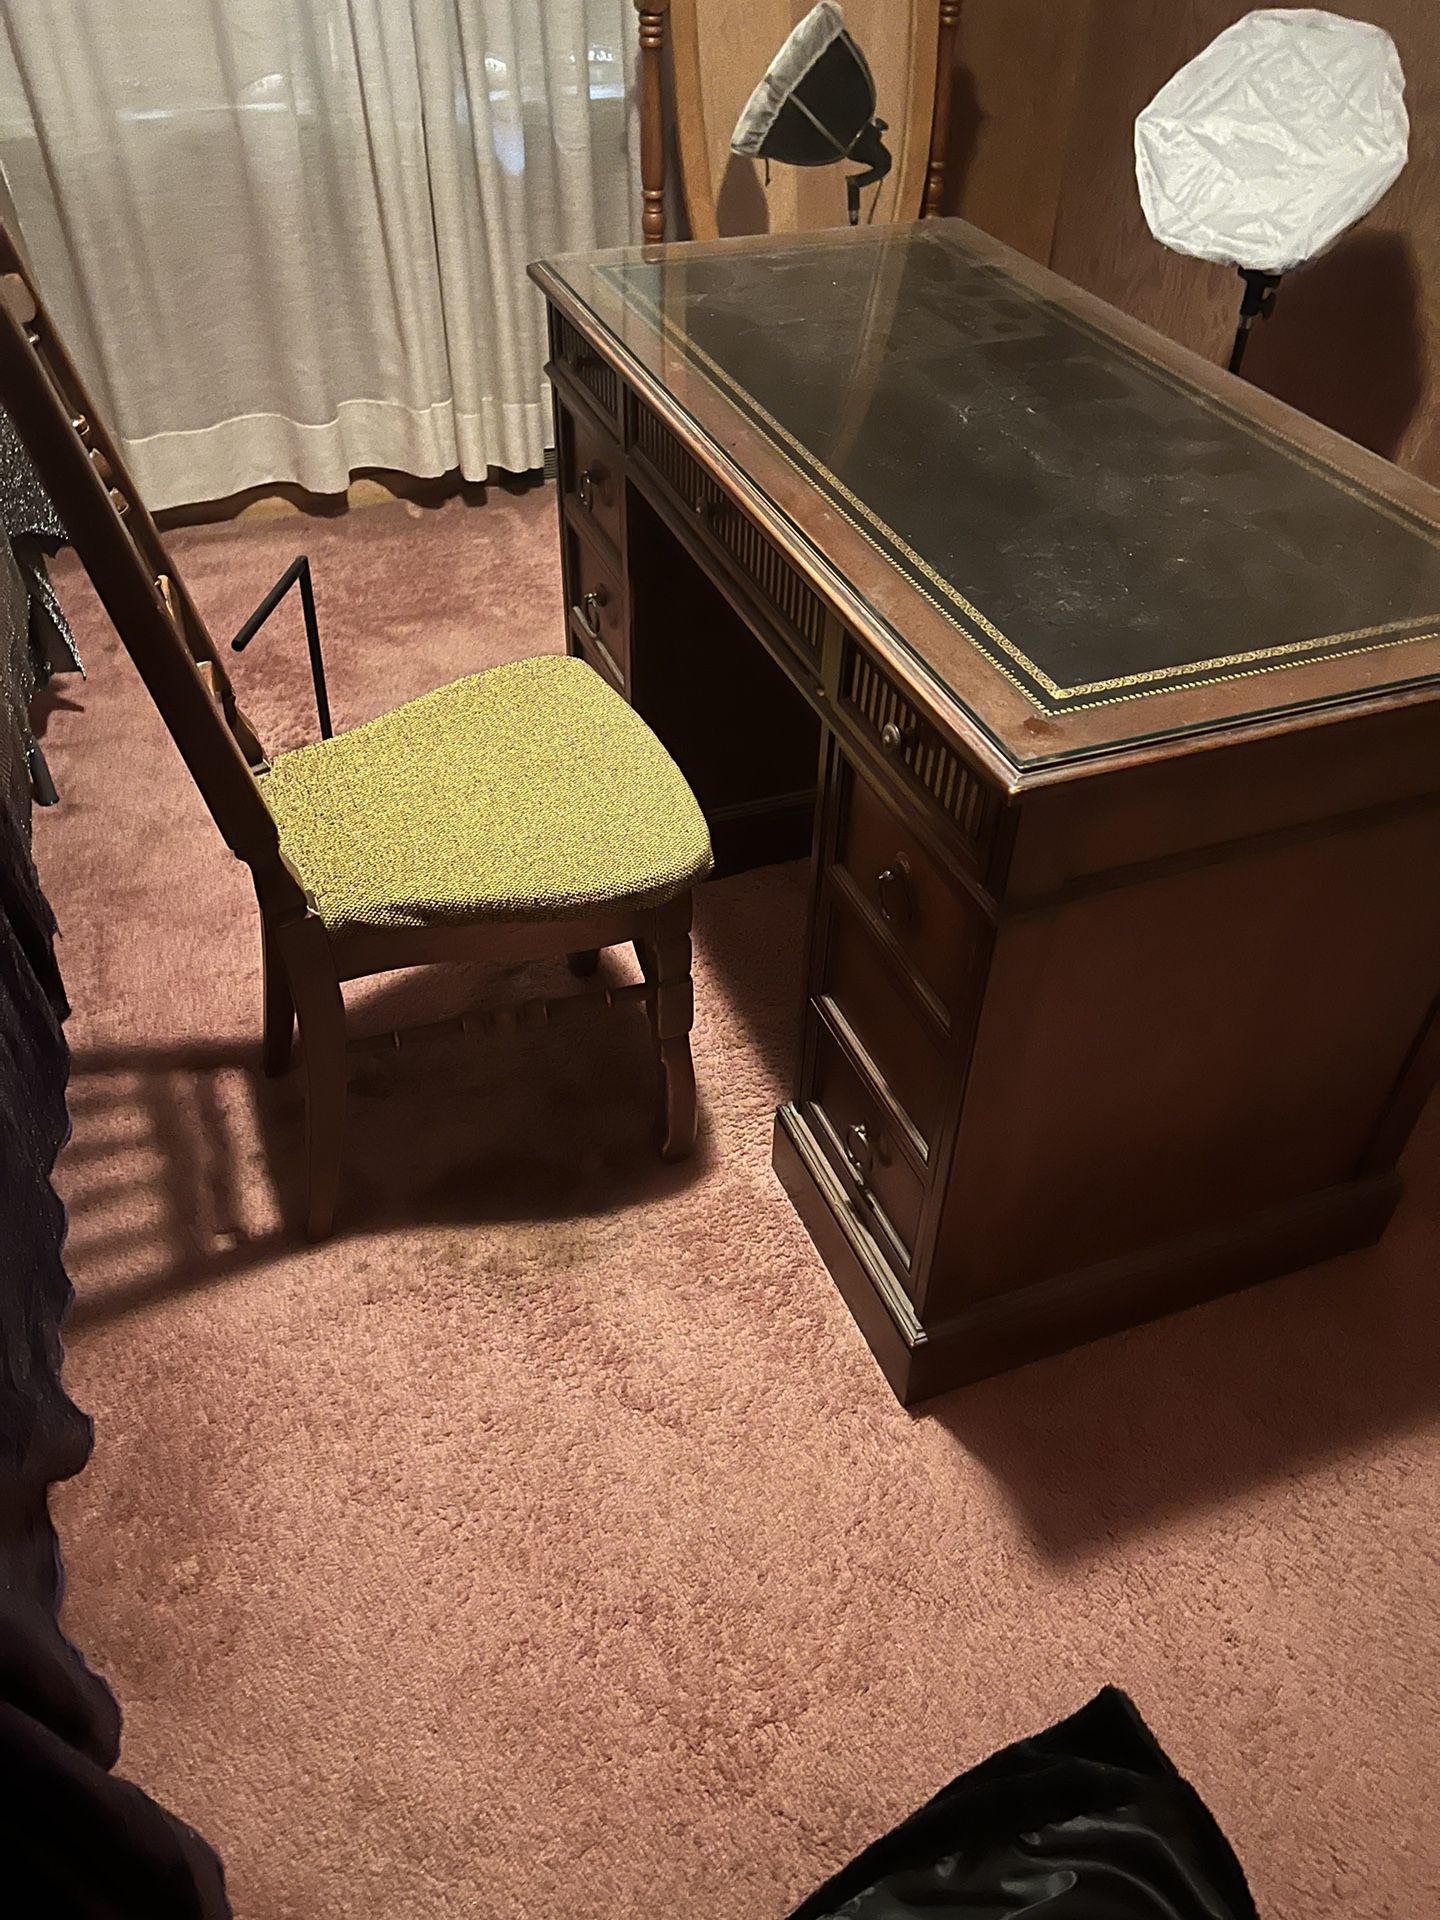 Vintage Retro 1930s Style Desk With Glass Top And Chair .. Dove Tail .. Good Condition